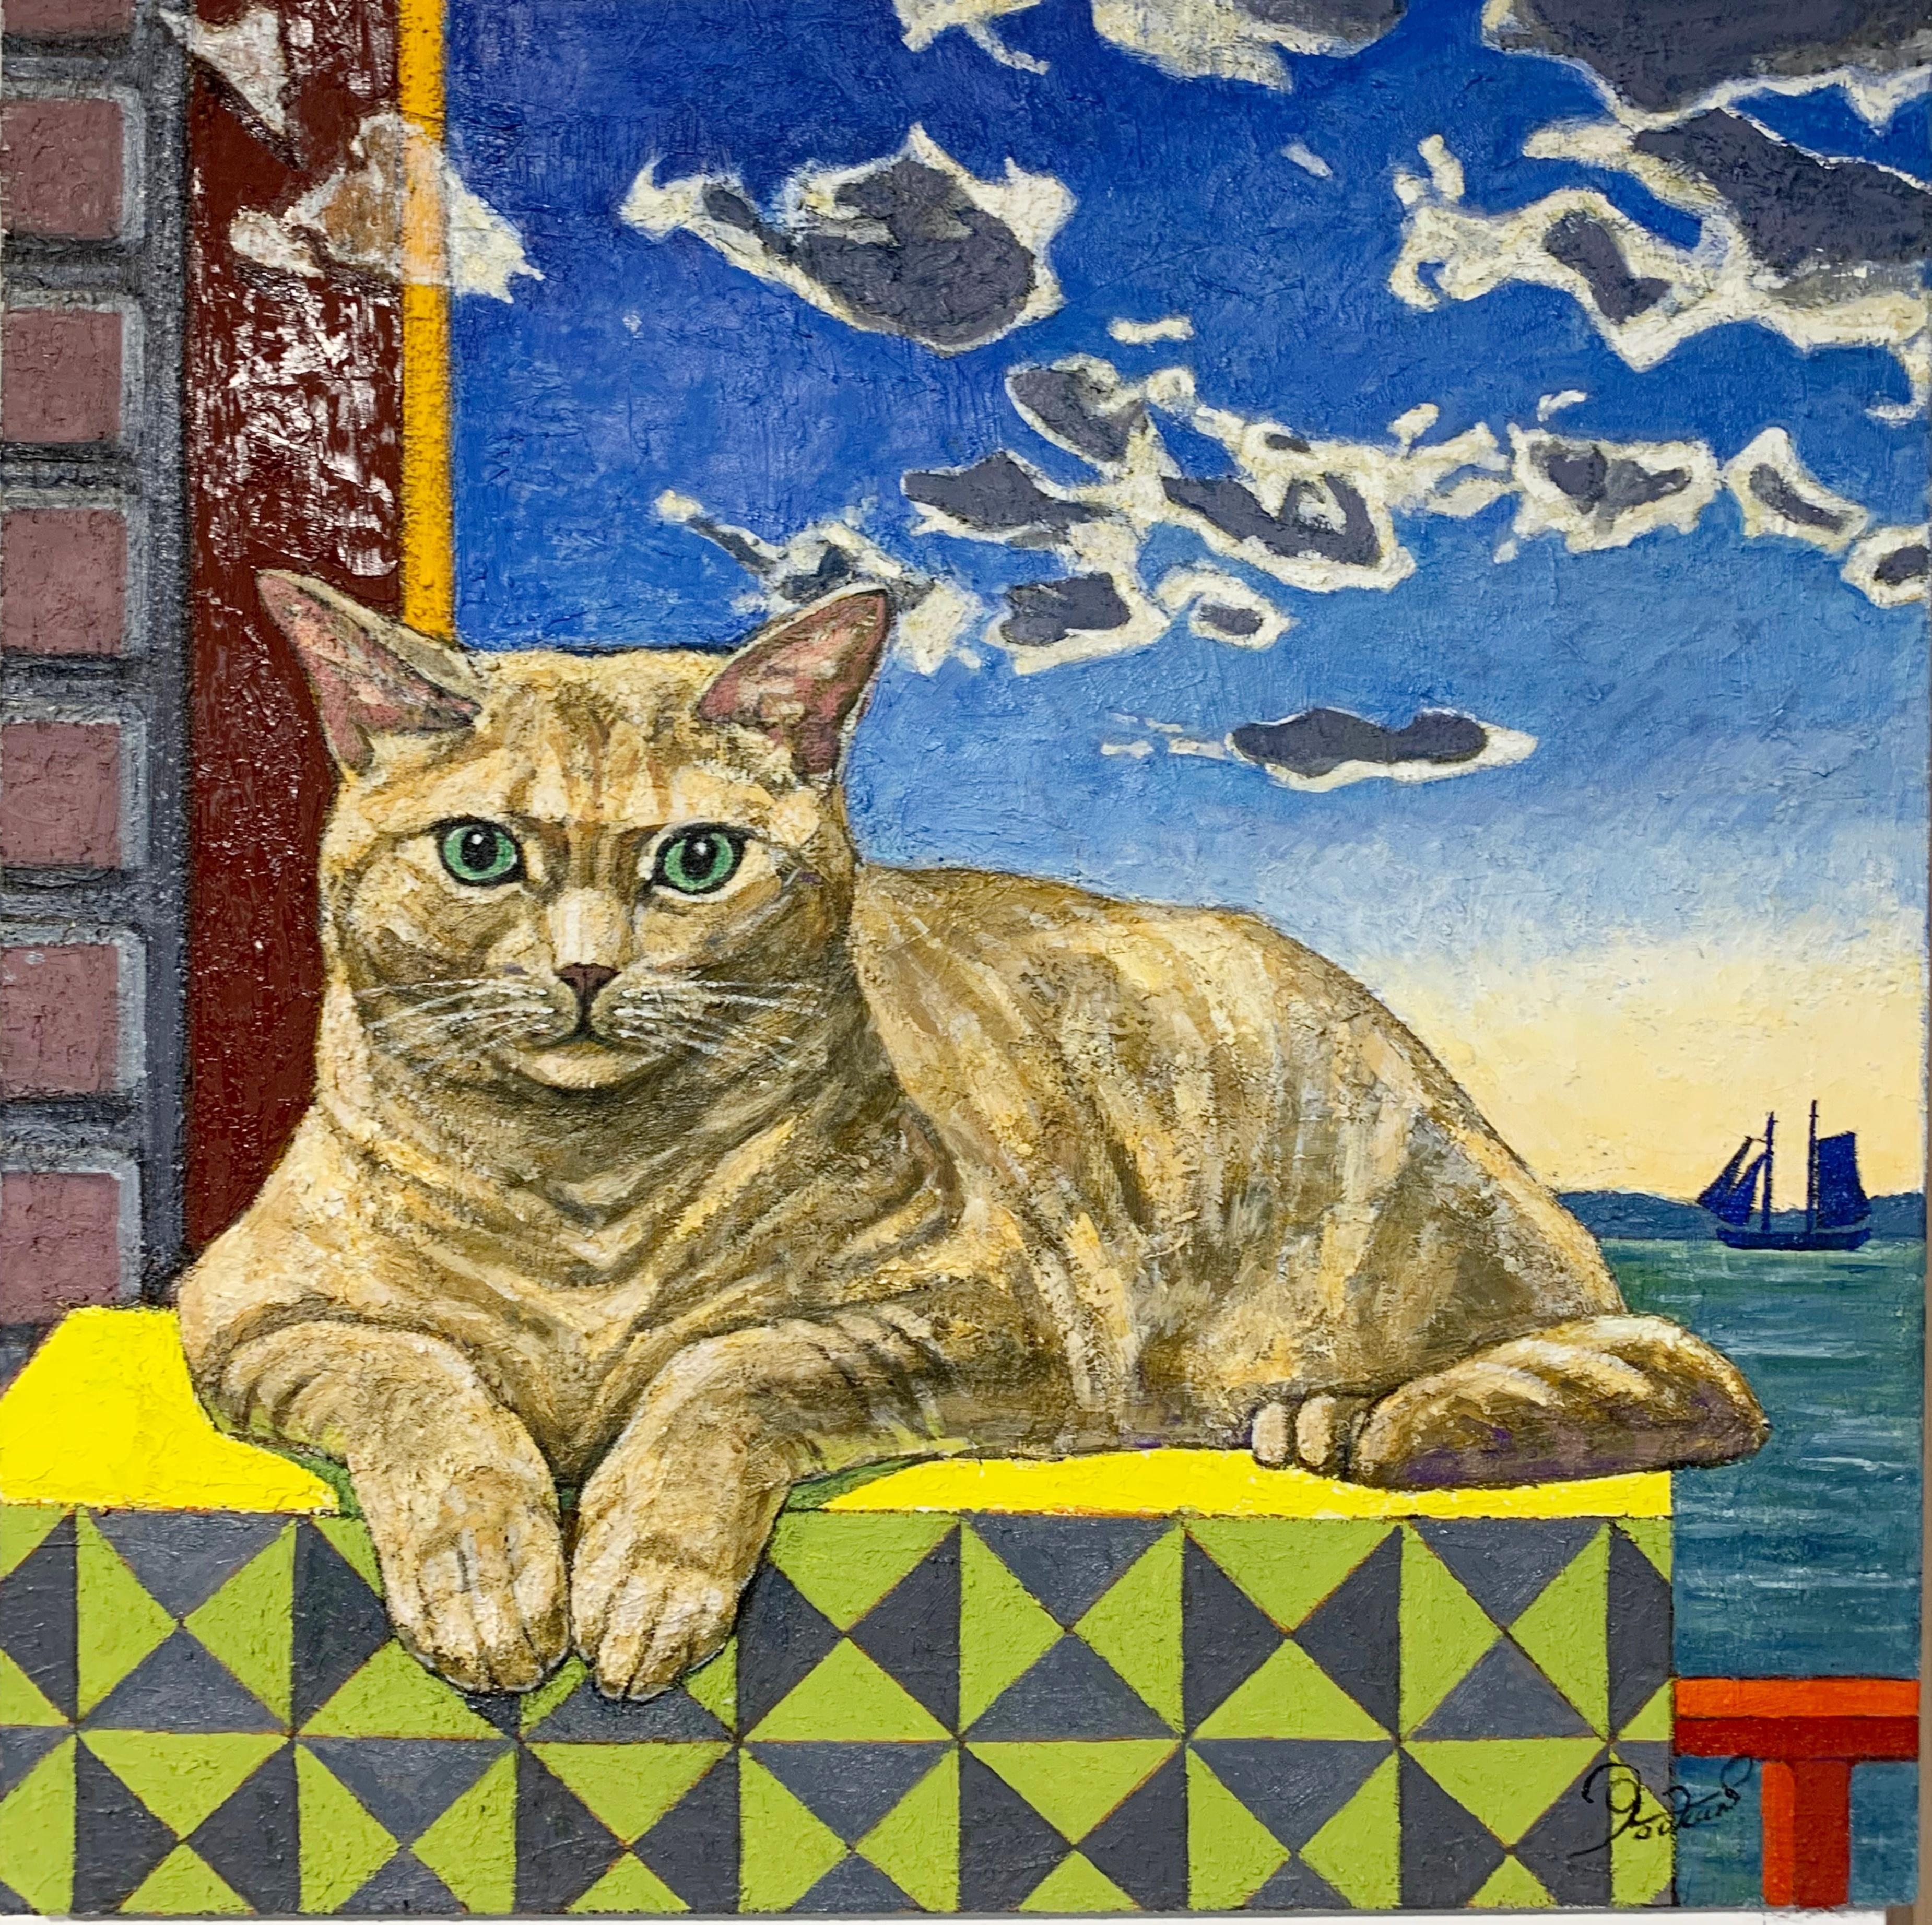 Yookan Westfield Figurative Painting - Orange Cat's Thoughts (original painting by renowned Japanese American painter)